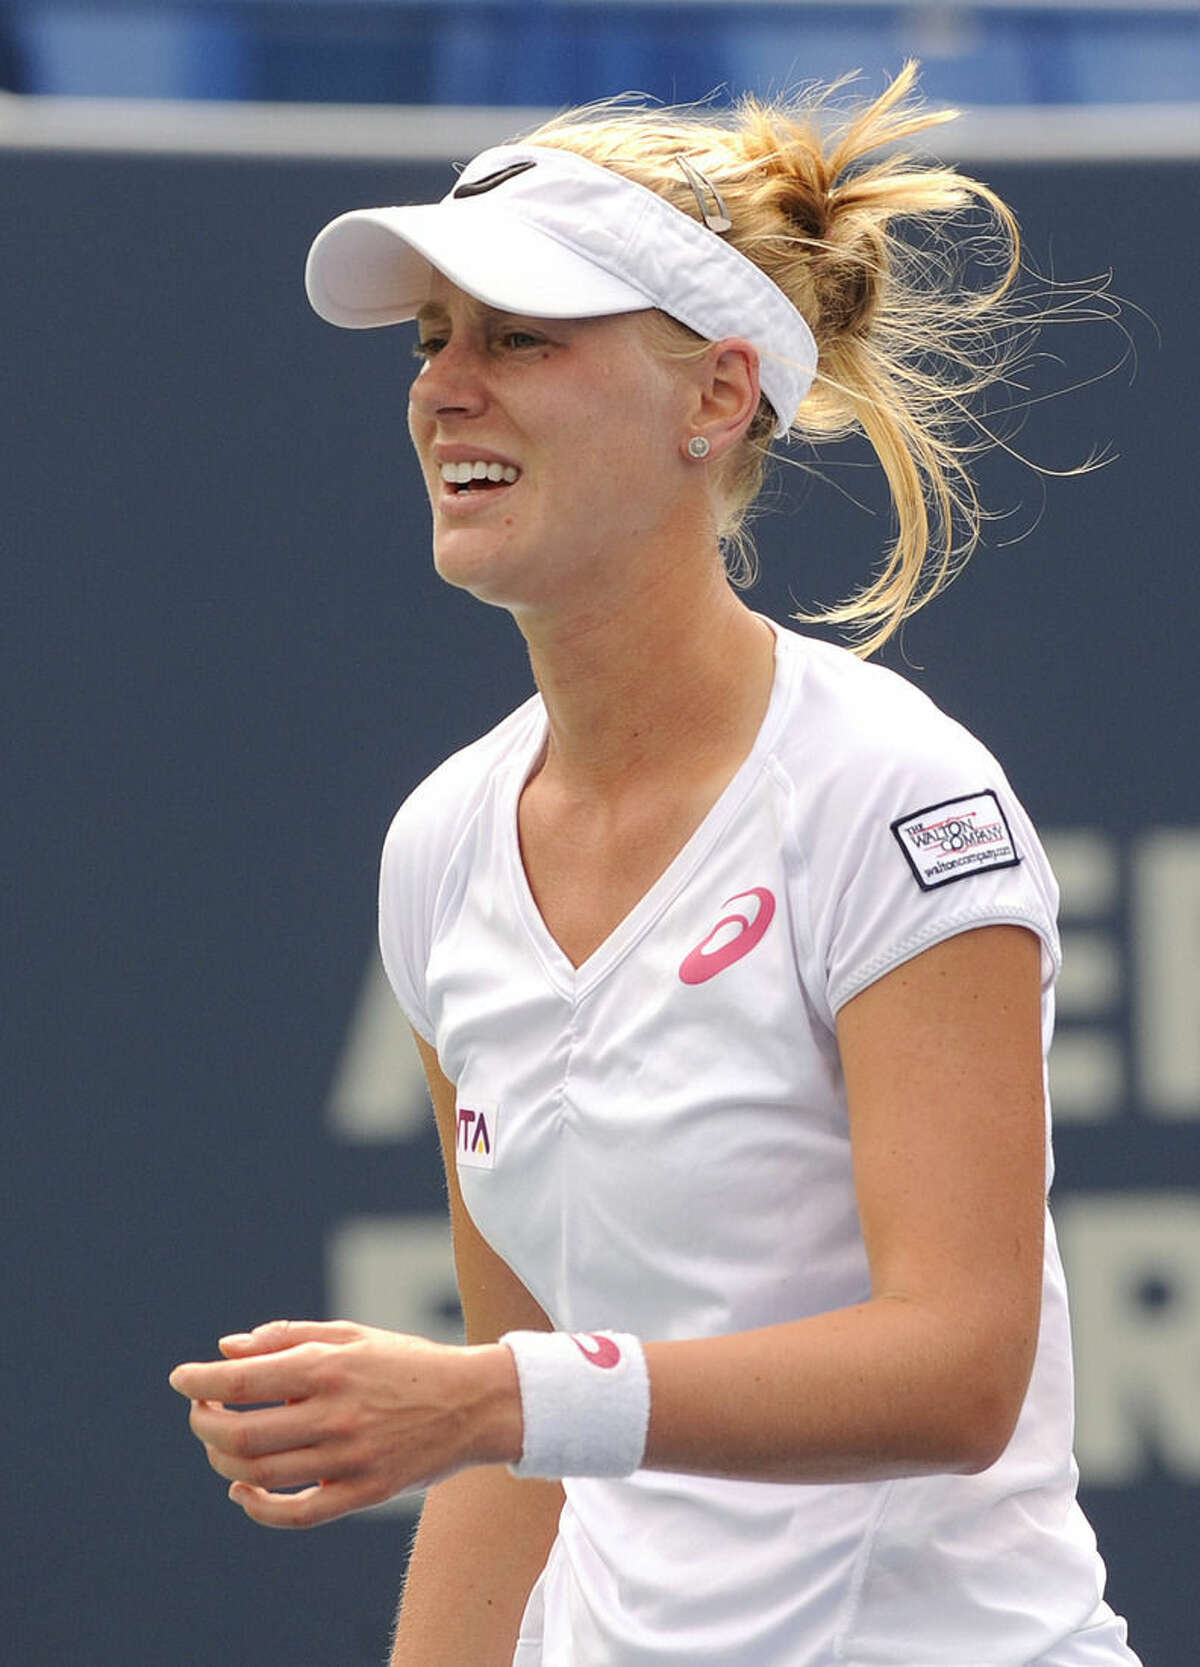 Alison Riske, of the United States, reacts after losing a point during a quarterfinal match against Magdalena Rybarikova, of Slovakia, at the New Haven Open tennis tournament in New Haven, Conn., on Thursday, Aug. 21, 2014. Riske lost the match 7-5, 0-6, 6-4. (AP Photo/Fred Beckham)